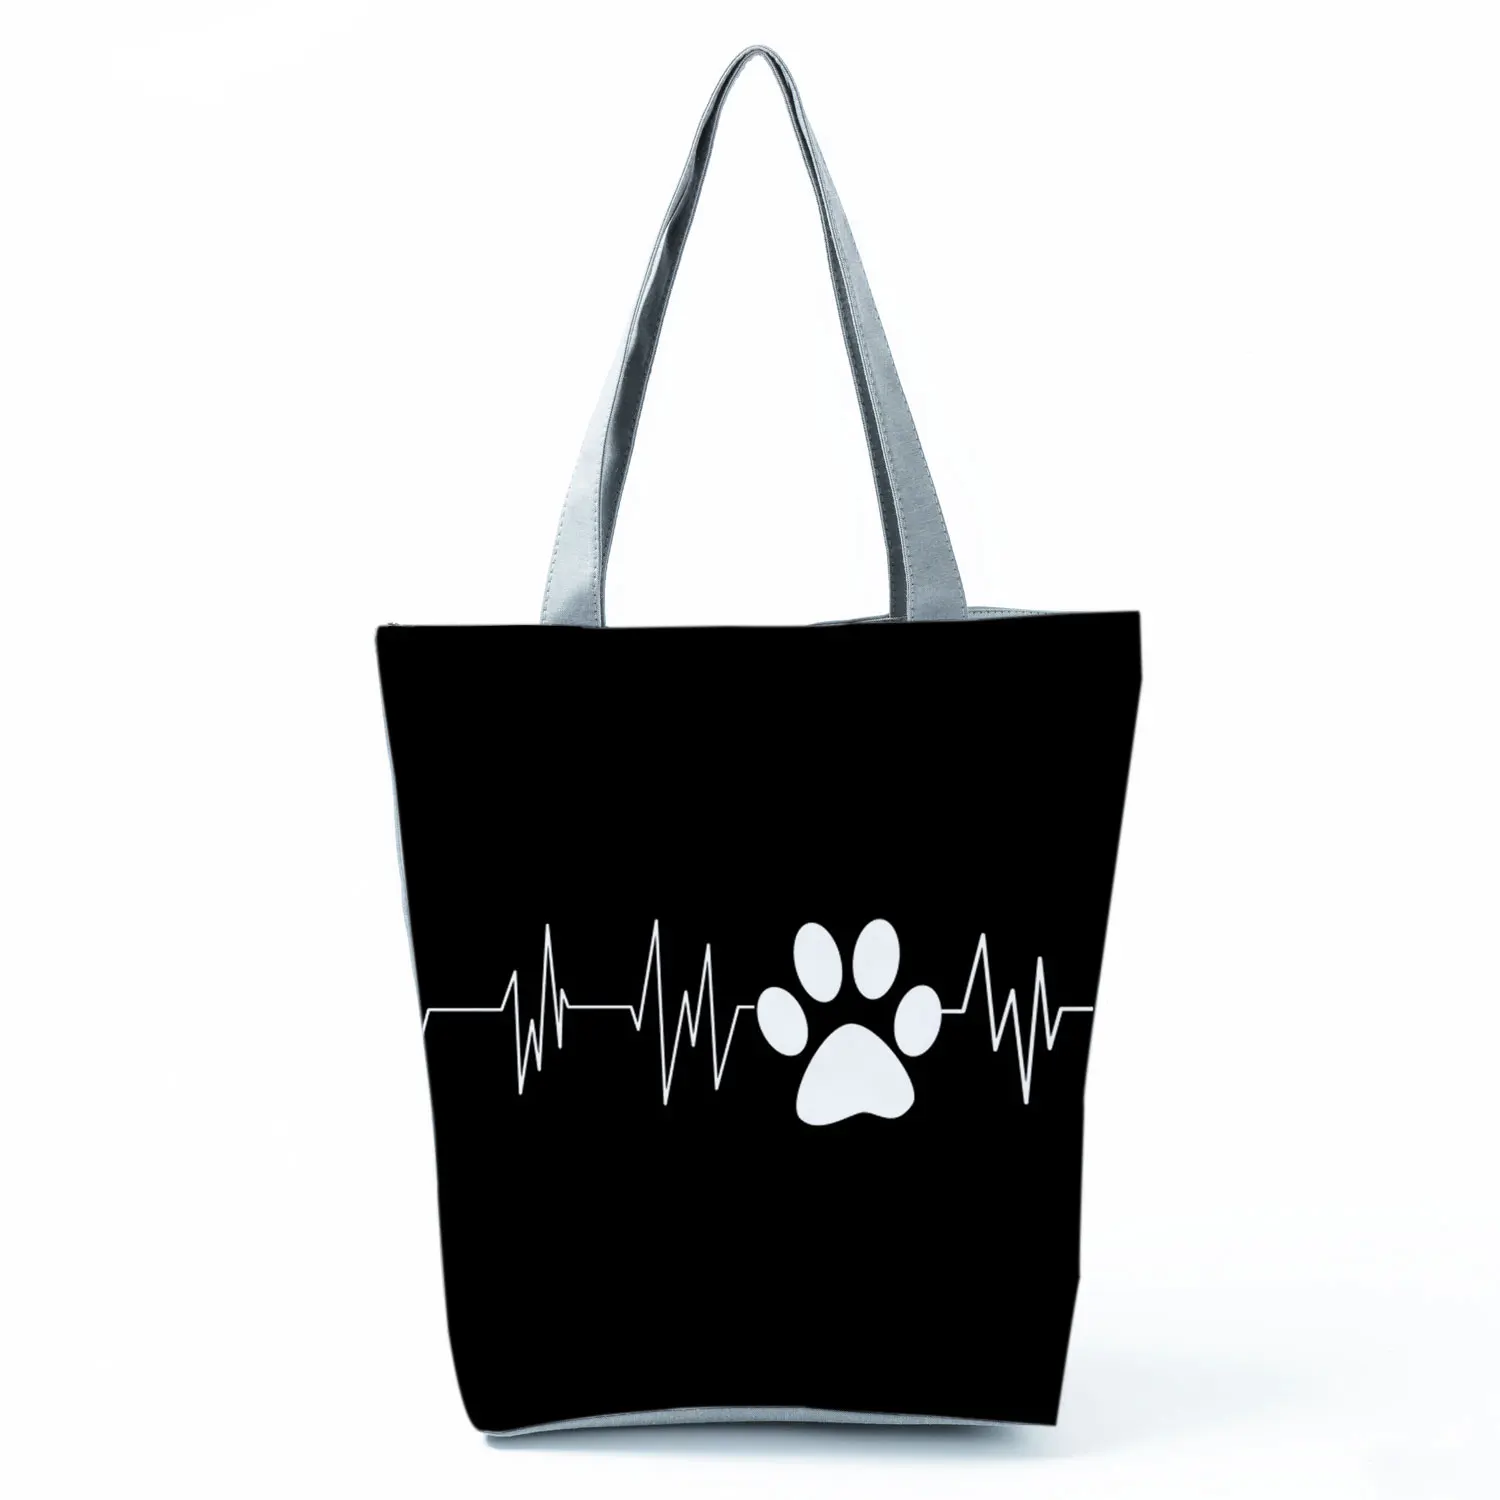 2022 New Fashion Women Dogs Paws Tote Love Dogs Funny Casual Handbags Kawaii Female Shoulder Bag Eco High Capacity Shopping Bags 